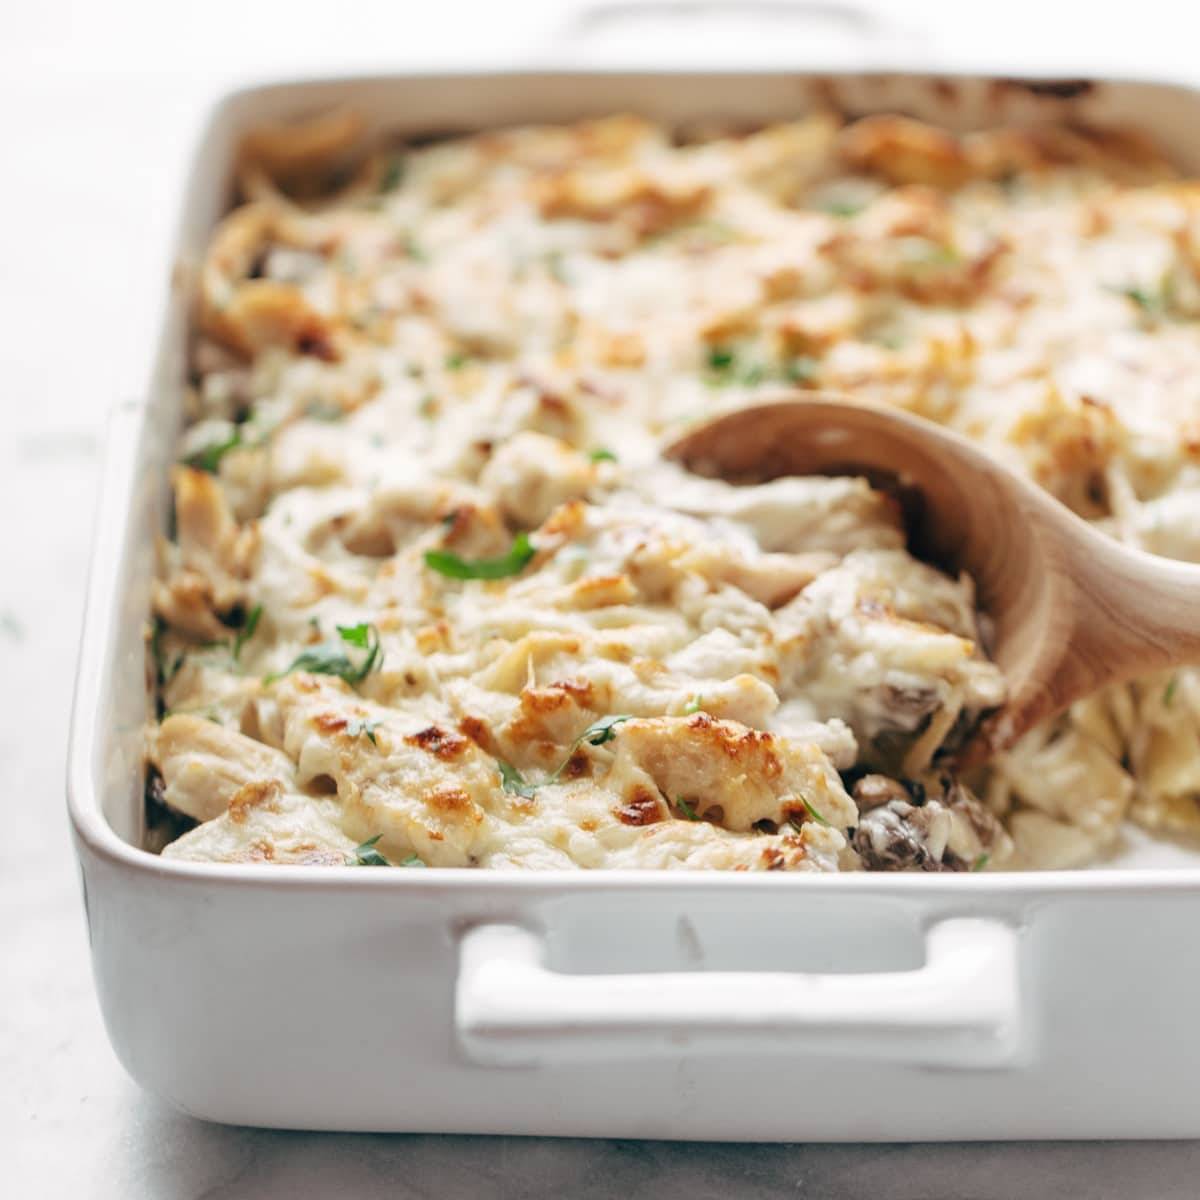 Chicken Tetrazzini baked in a pan with wooden spoon.